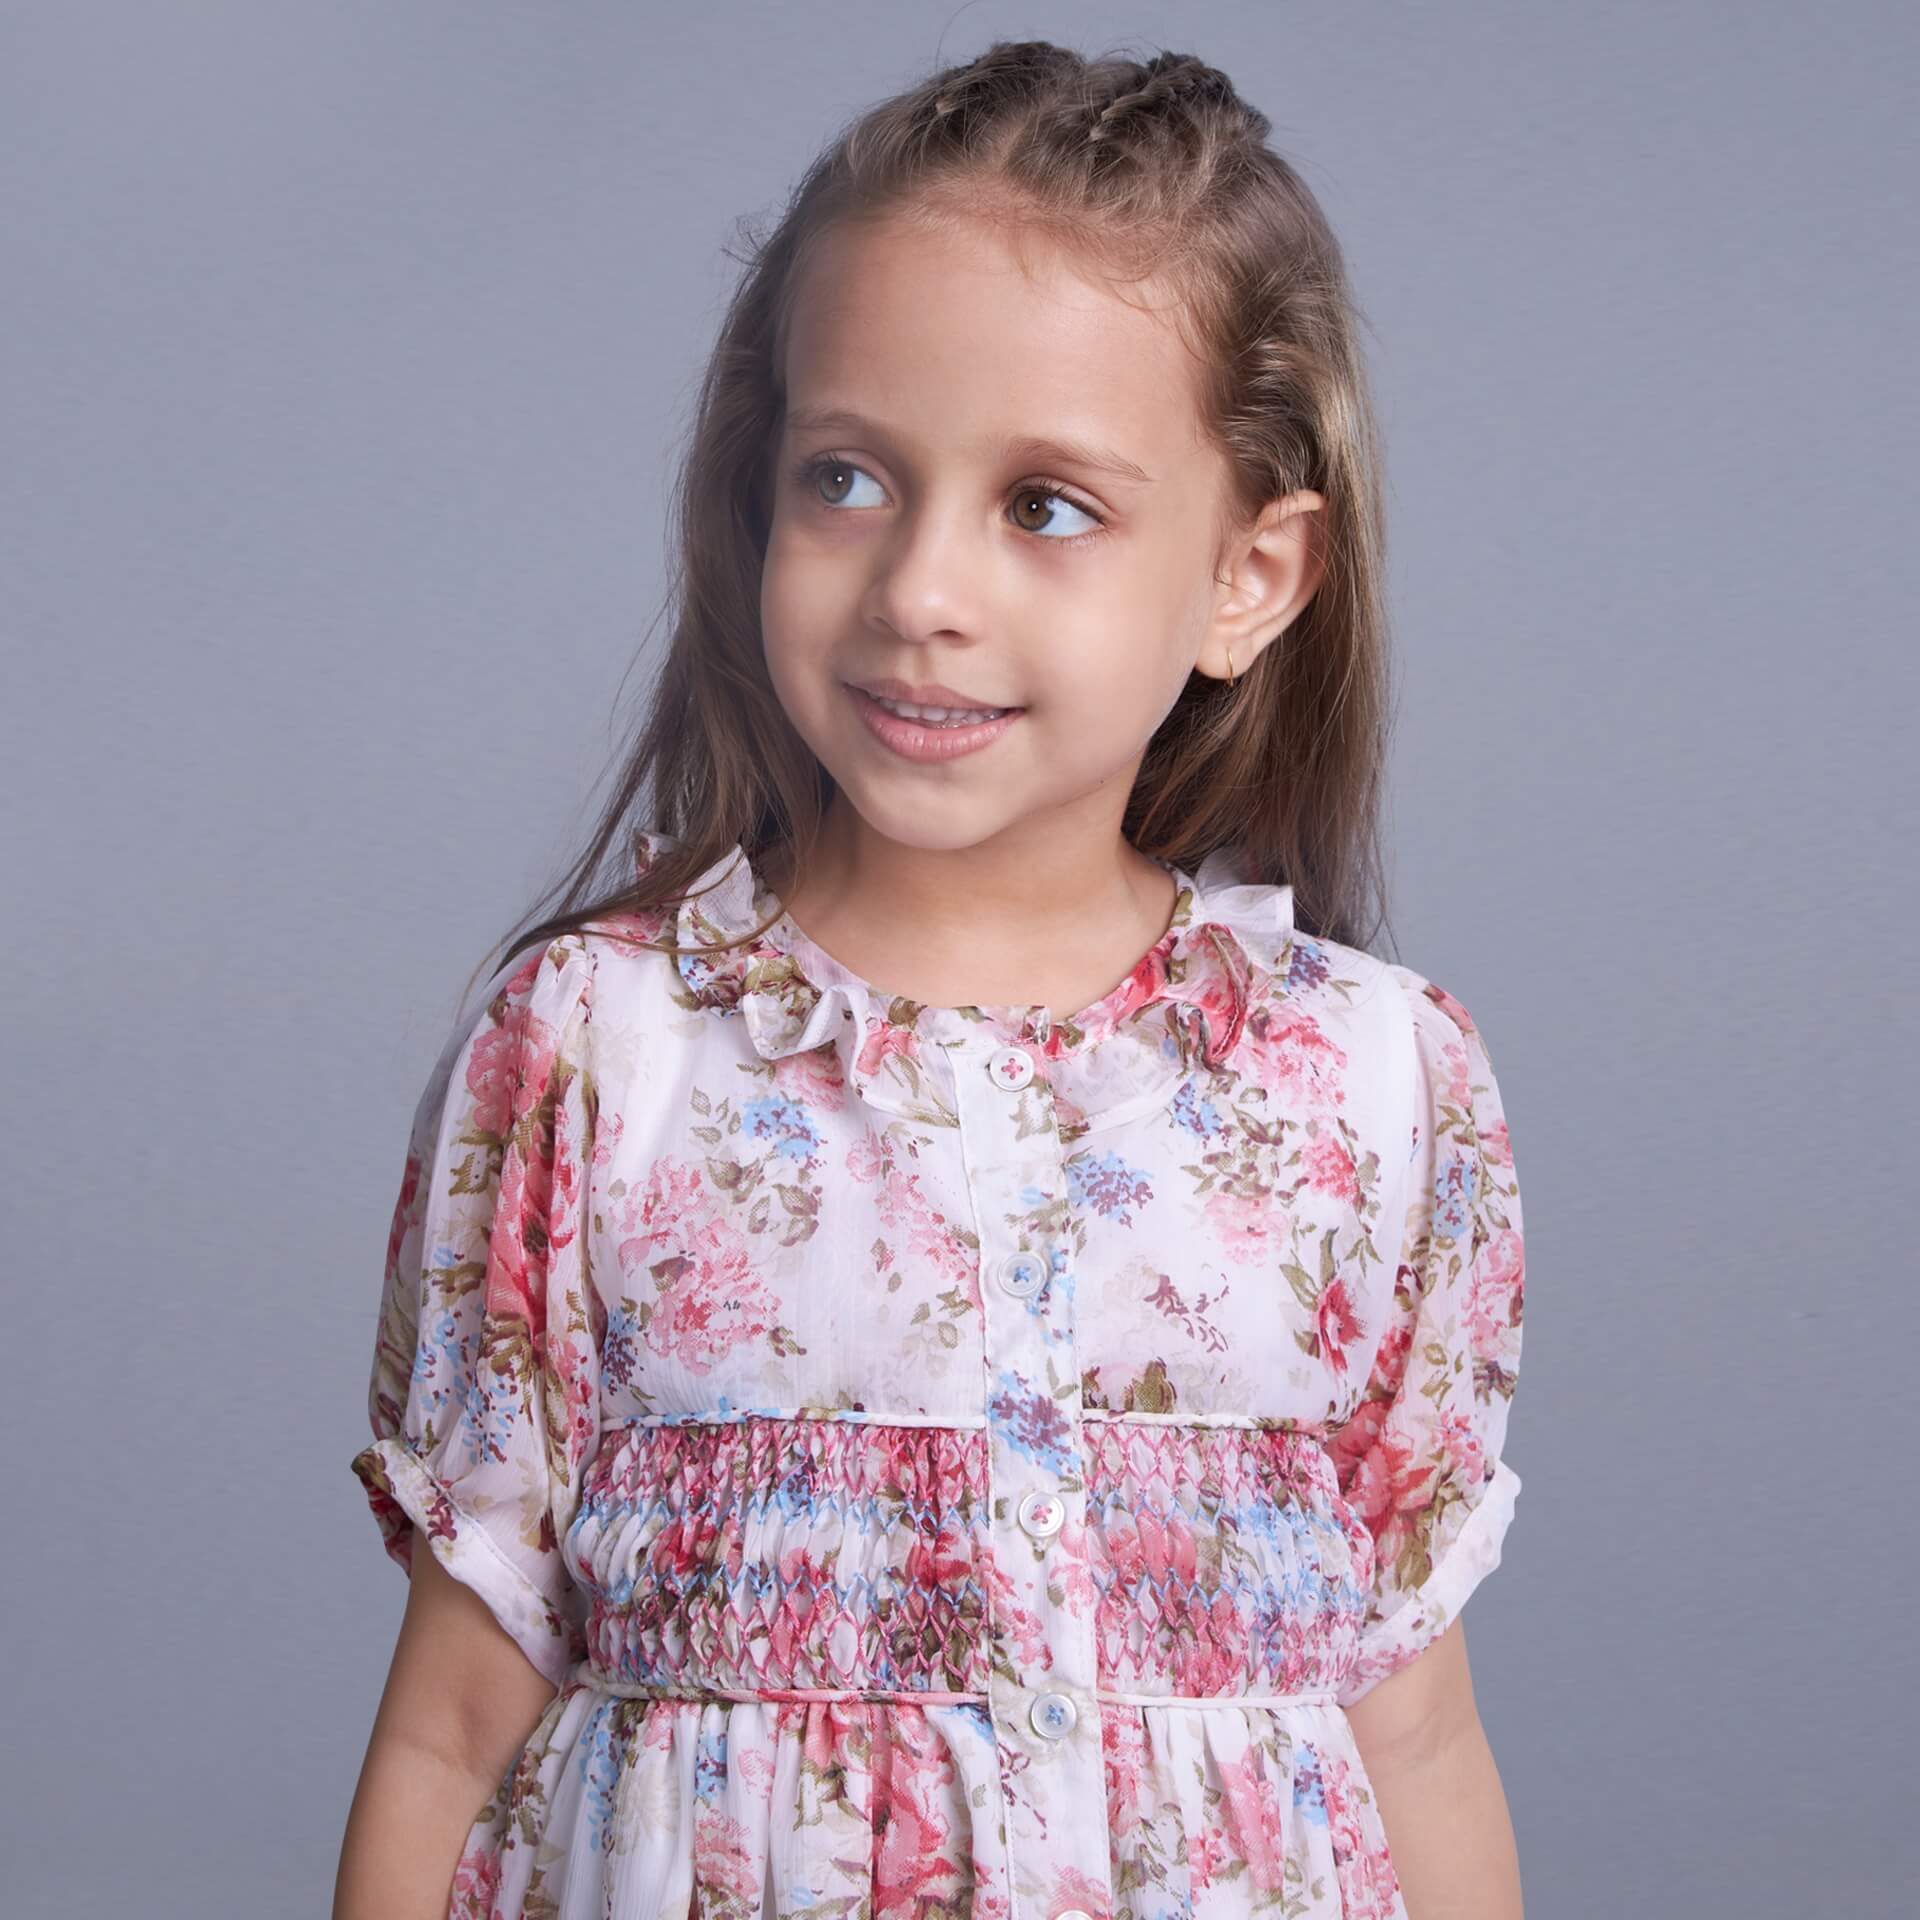 Sweet smile on her face, a little girl wearing an ivory chiffon floral embroidered smock dress